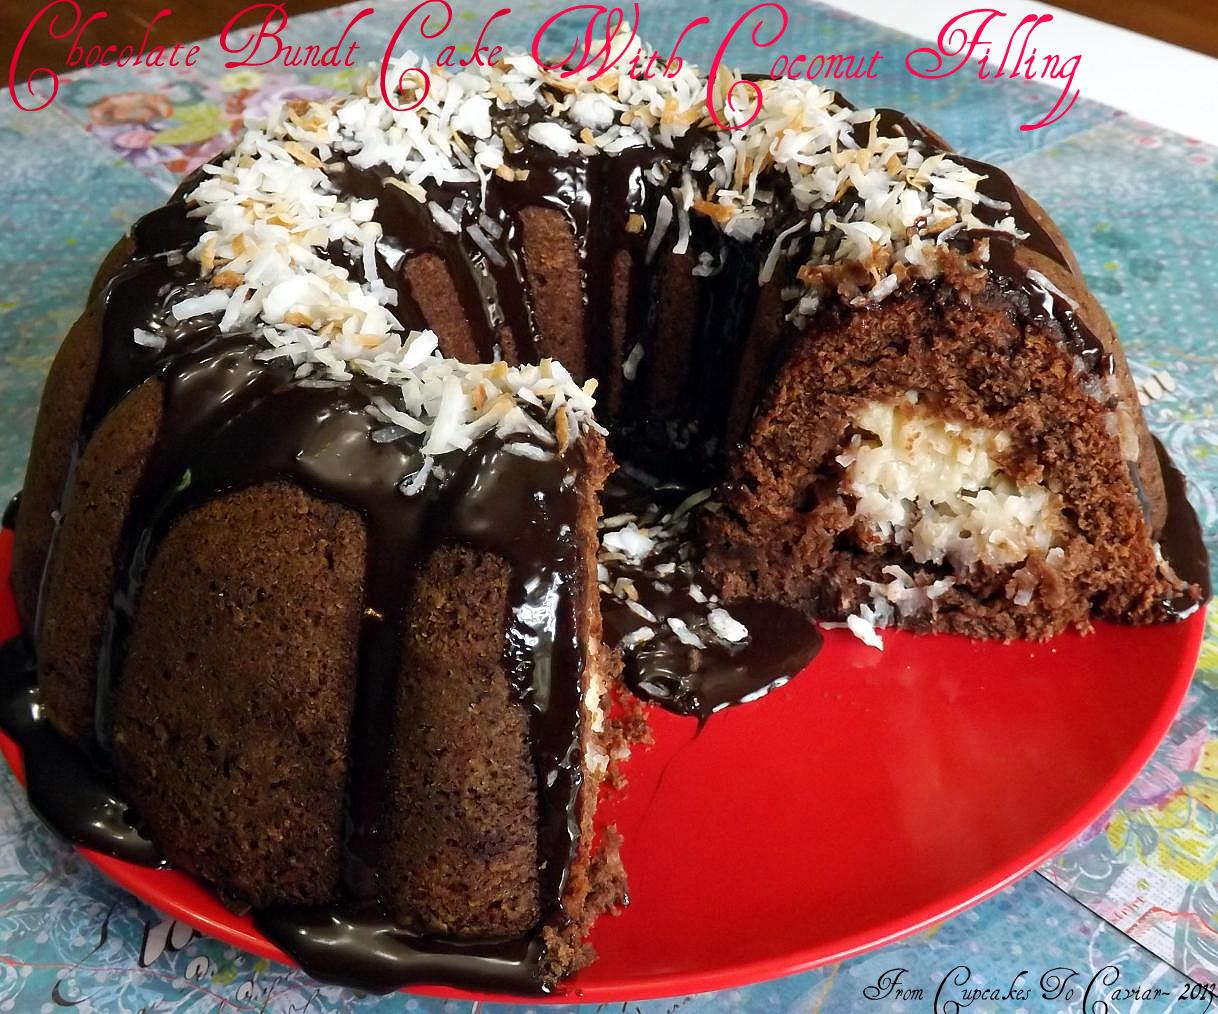 Chocolate Bundt Cake With A Creamy Coconut Filling